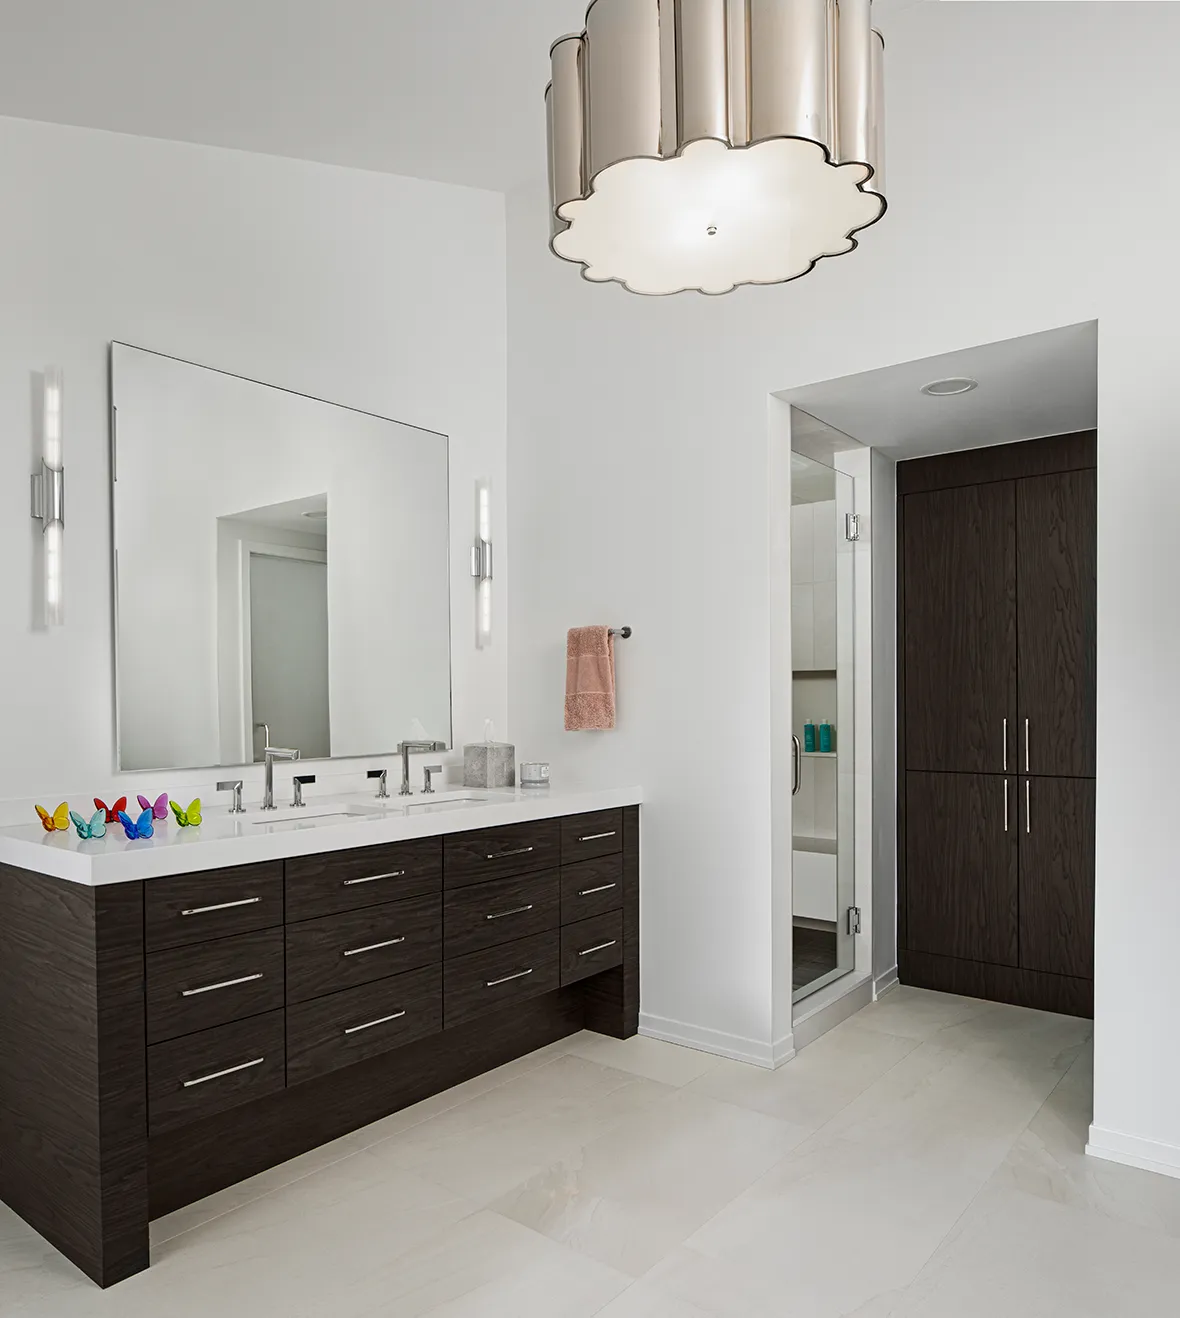 Forest Hill Diamond Building Bathroom Remodeling Dark Wood Cabinetry and White Floors